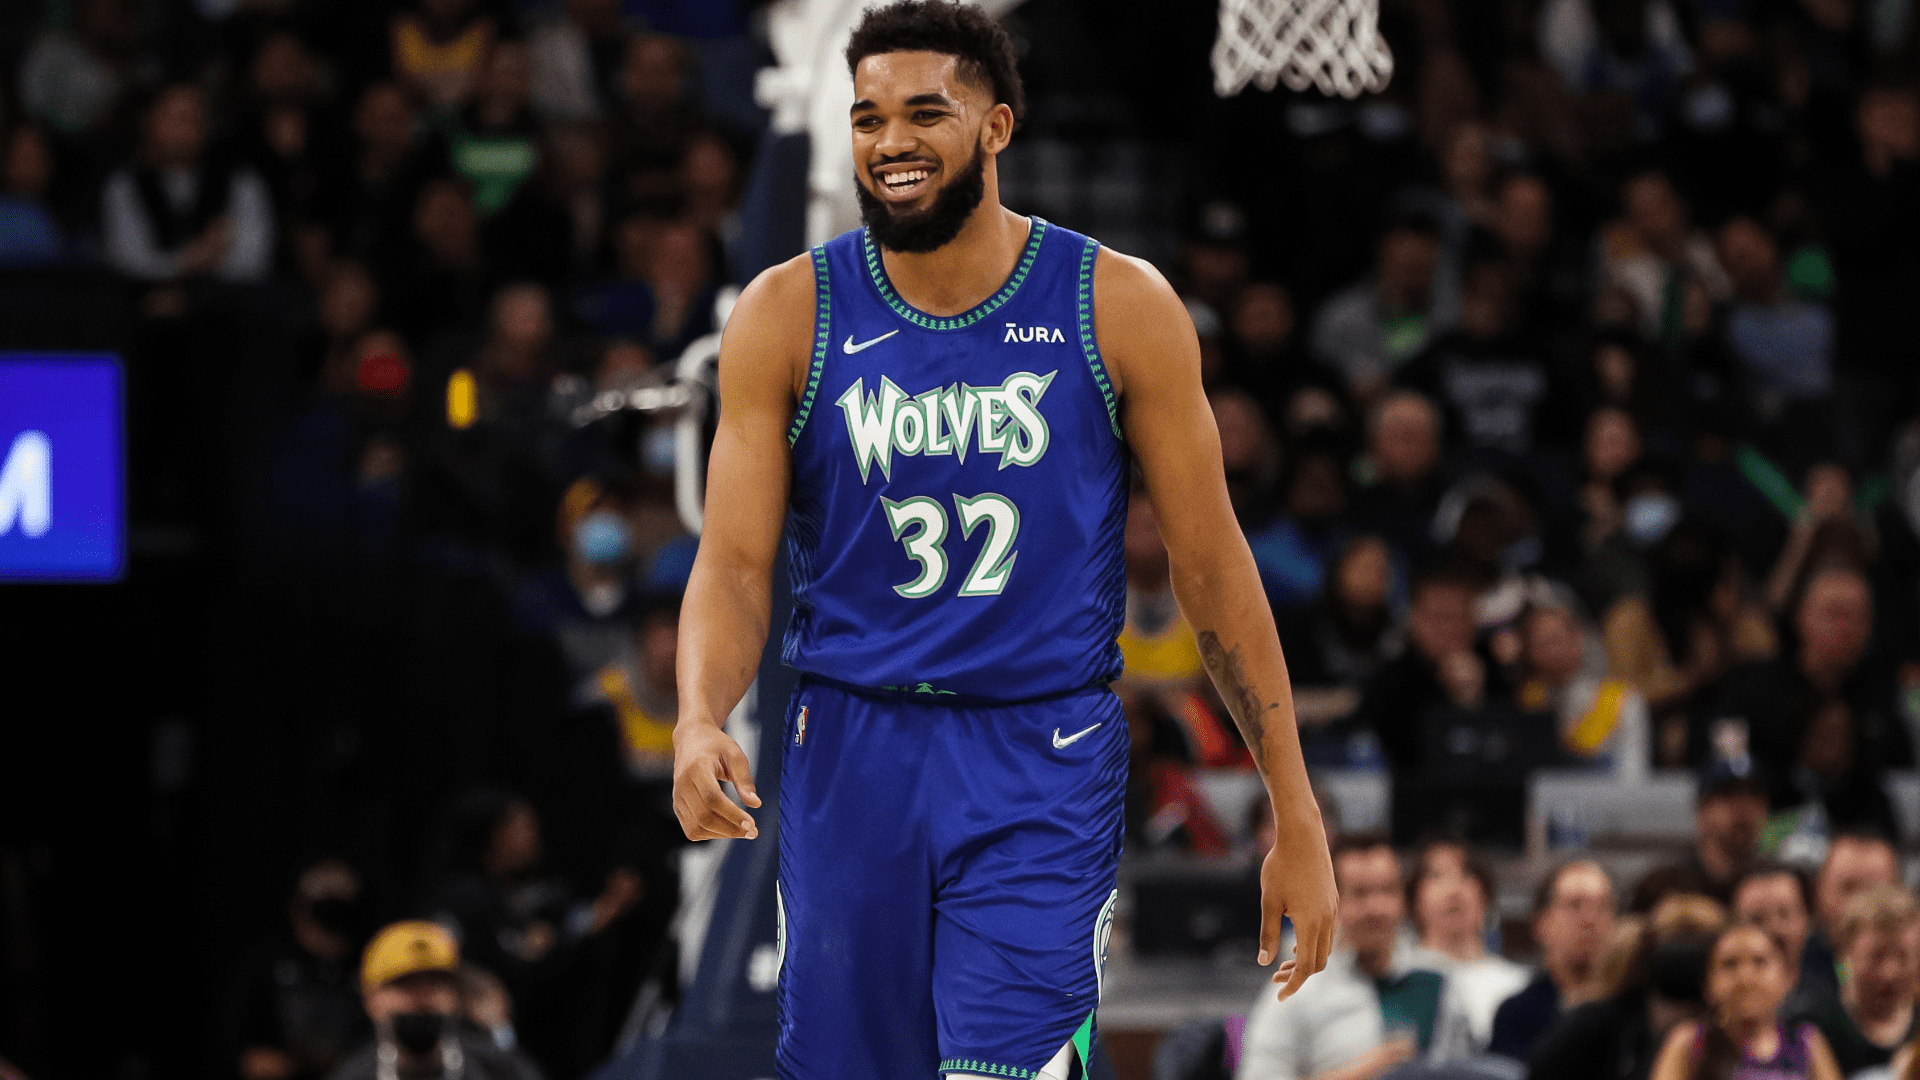 Karl Anthony Towns Player of the Week